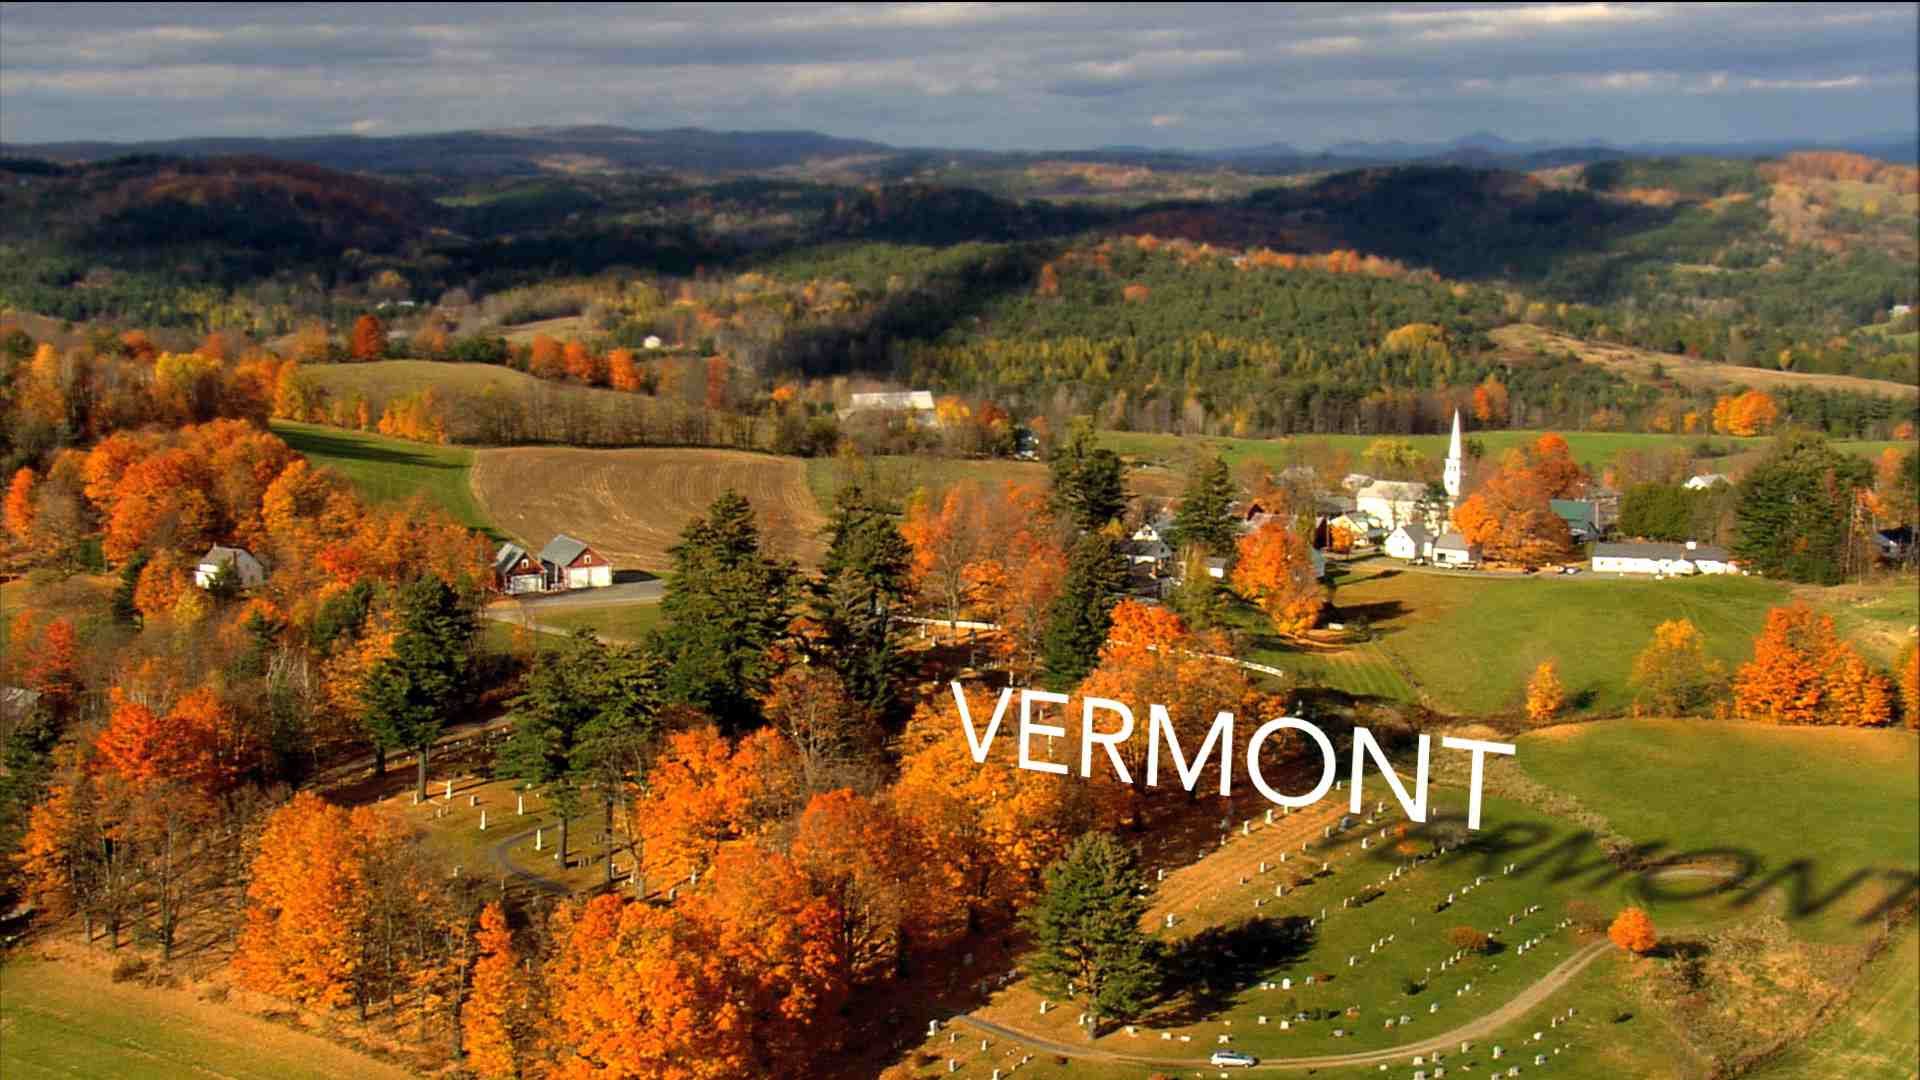 "How to Apply for Food Stamps in Vermont Online"